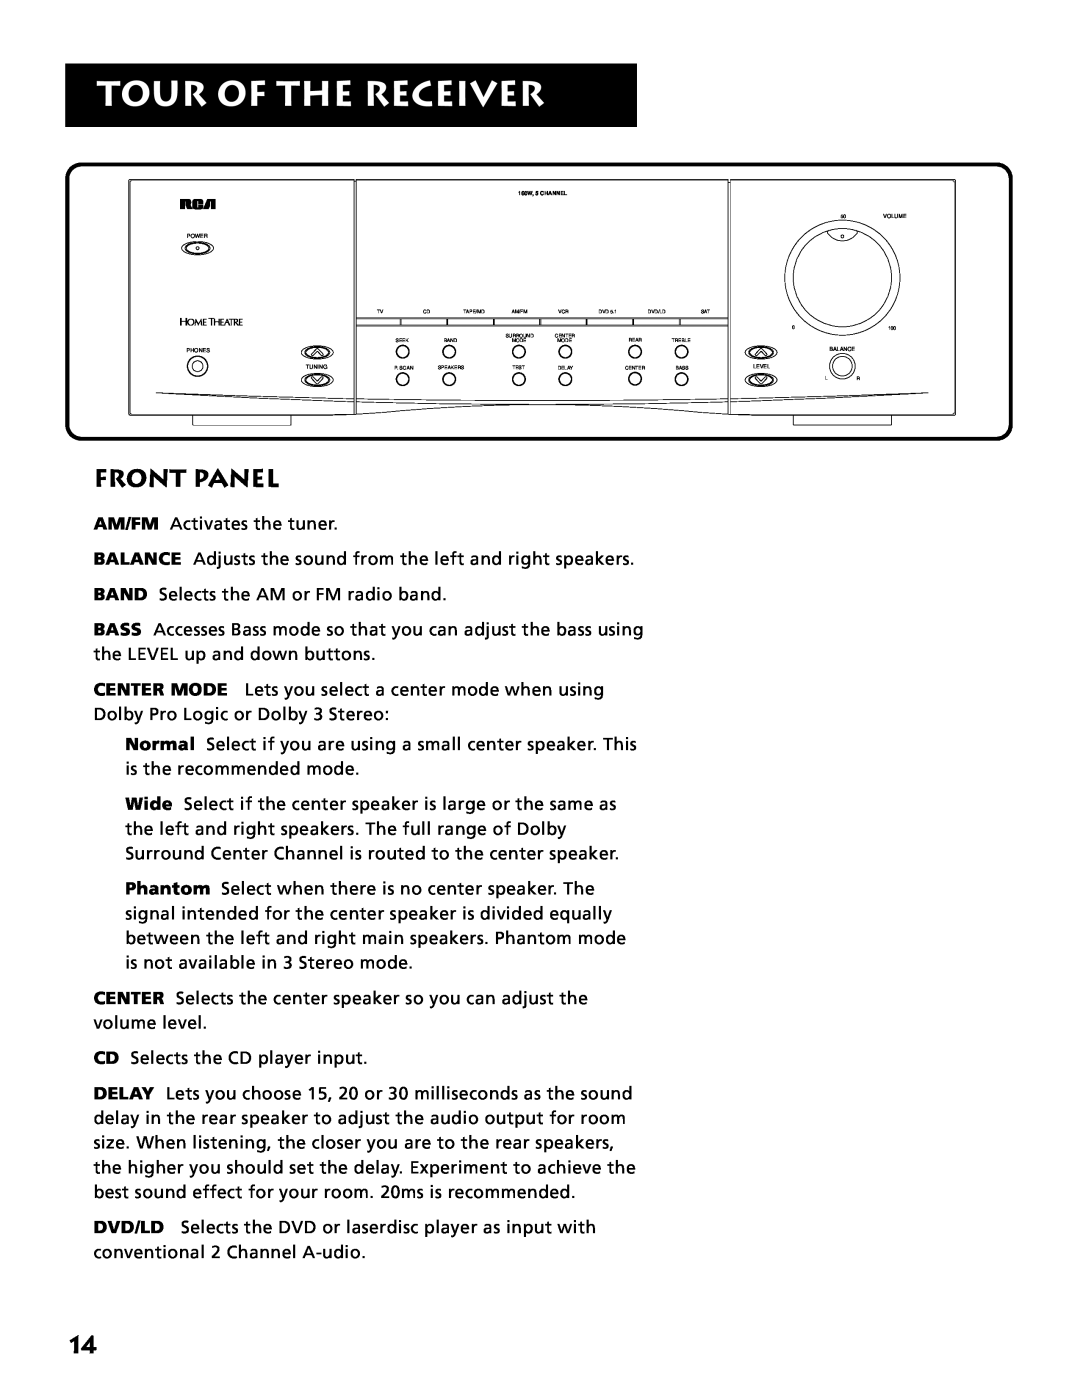 Electrohome RV-3798 manual Front Panel, Tour Of The Receiver 